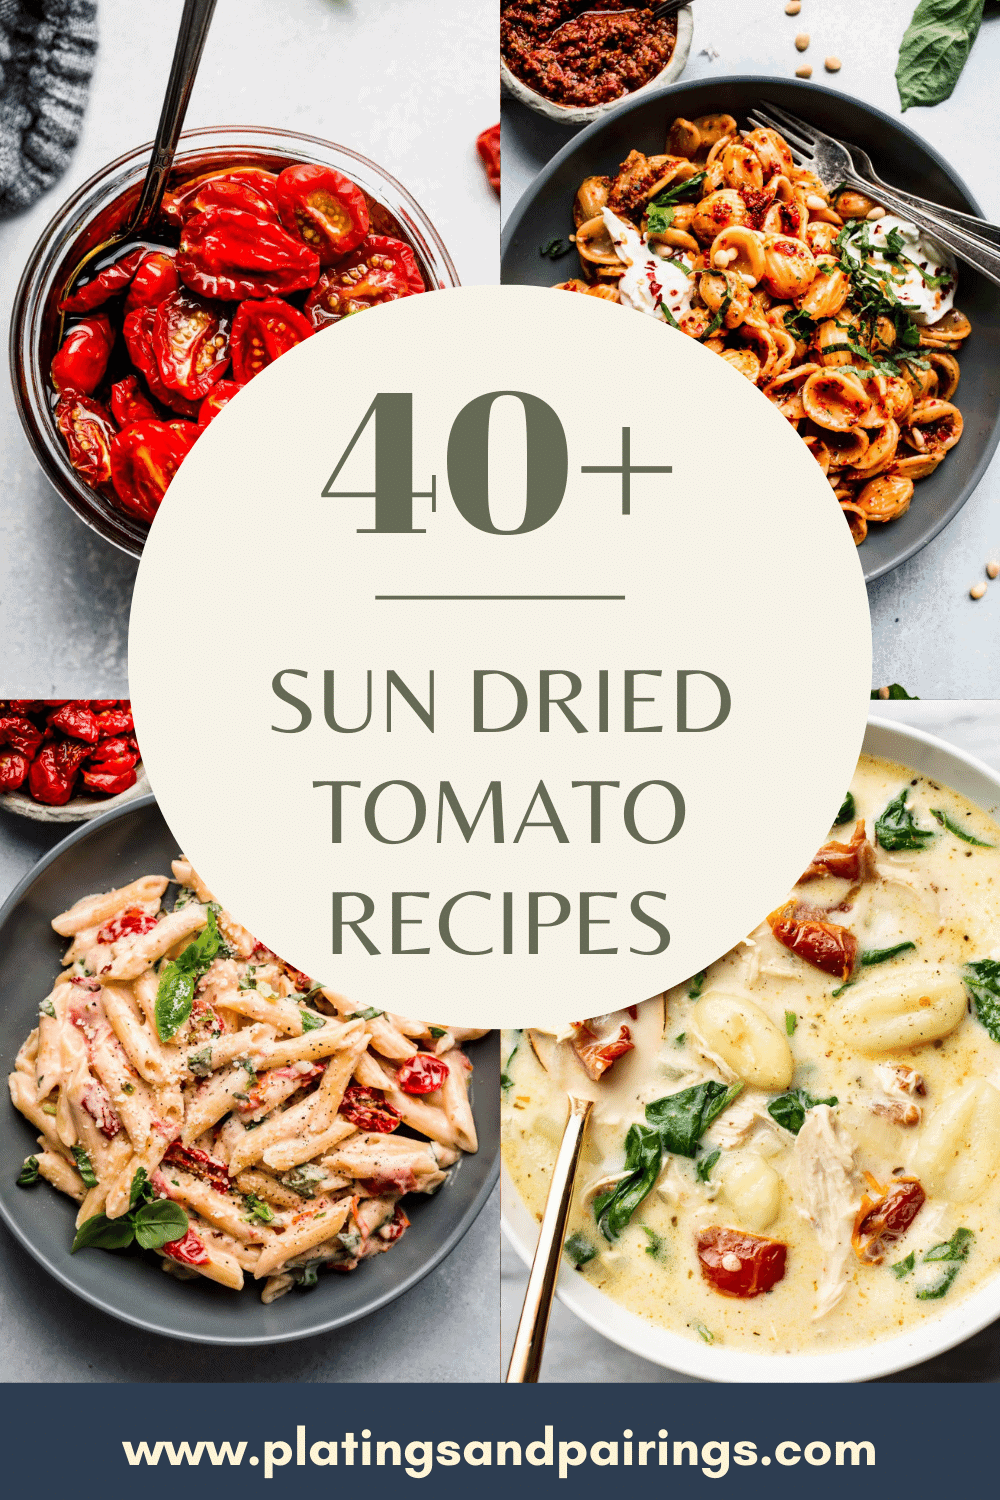 COLLAGE OF SUN DRIED TOMATO RECIPES WITH TEXT OVERLAY.